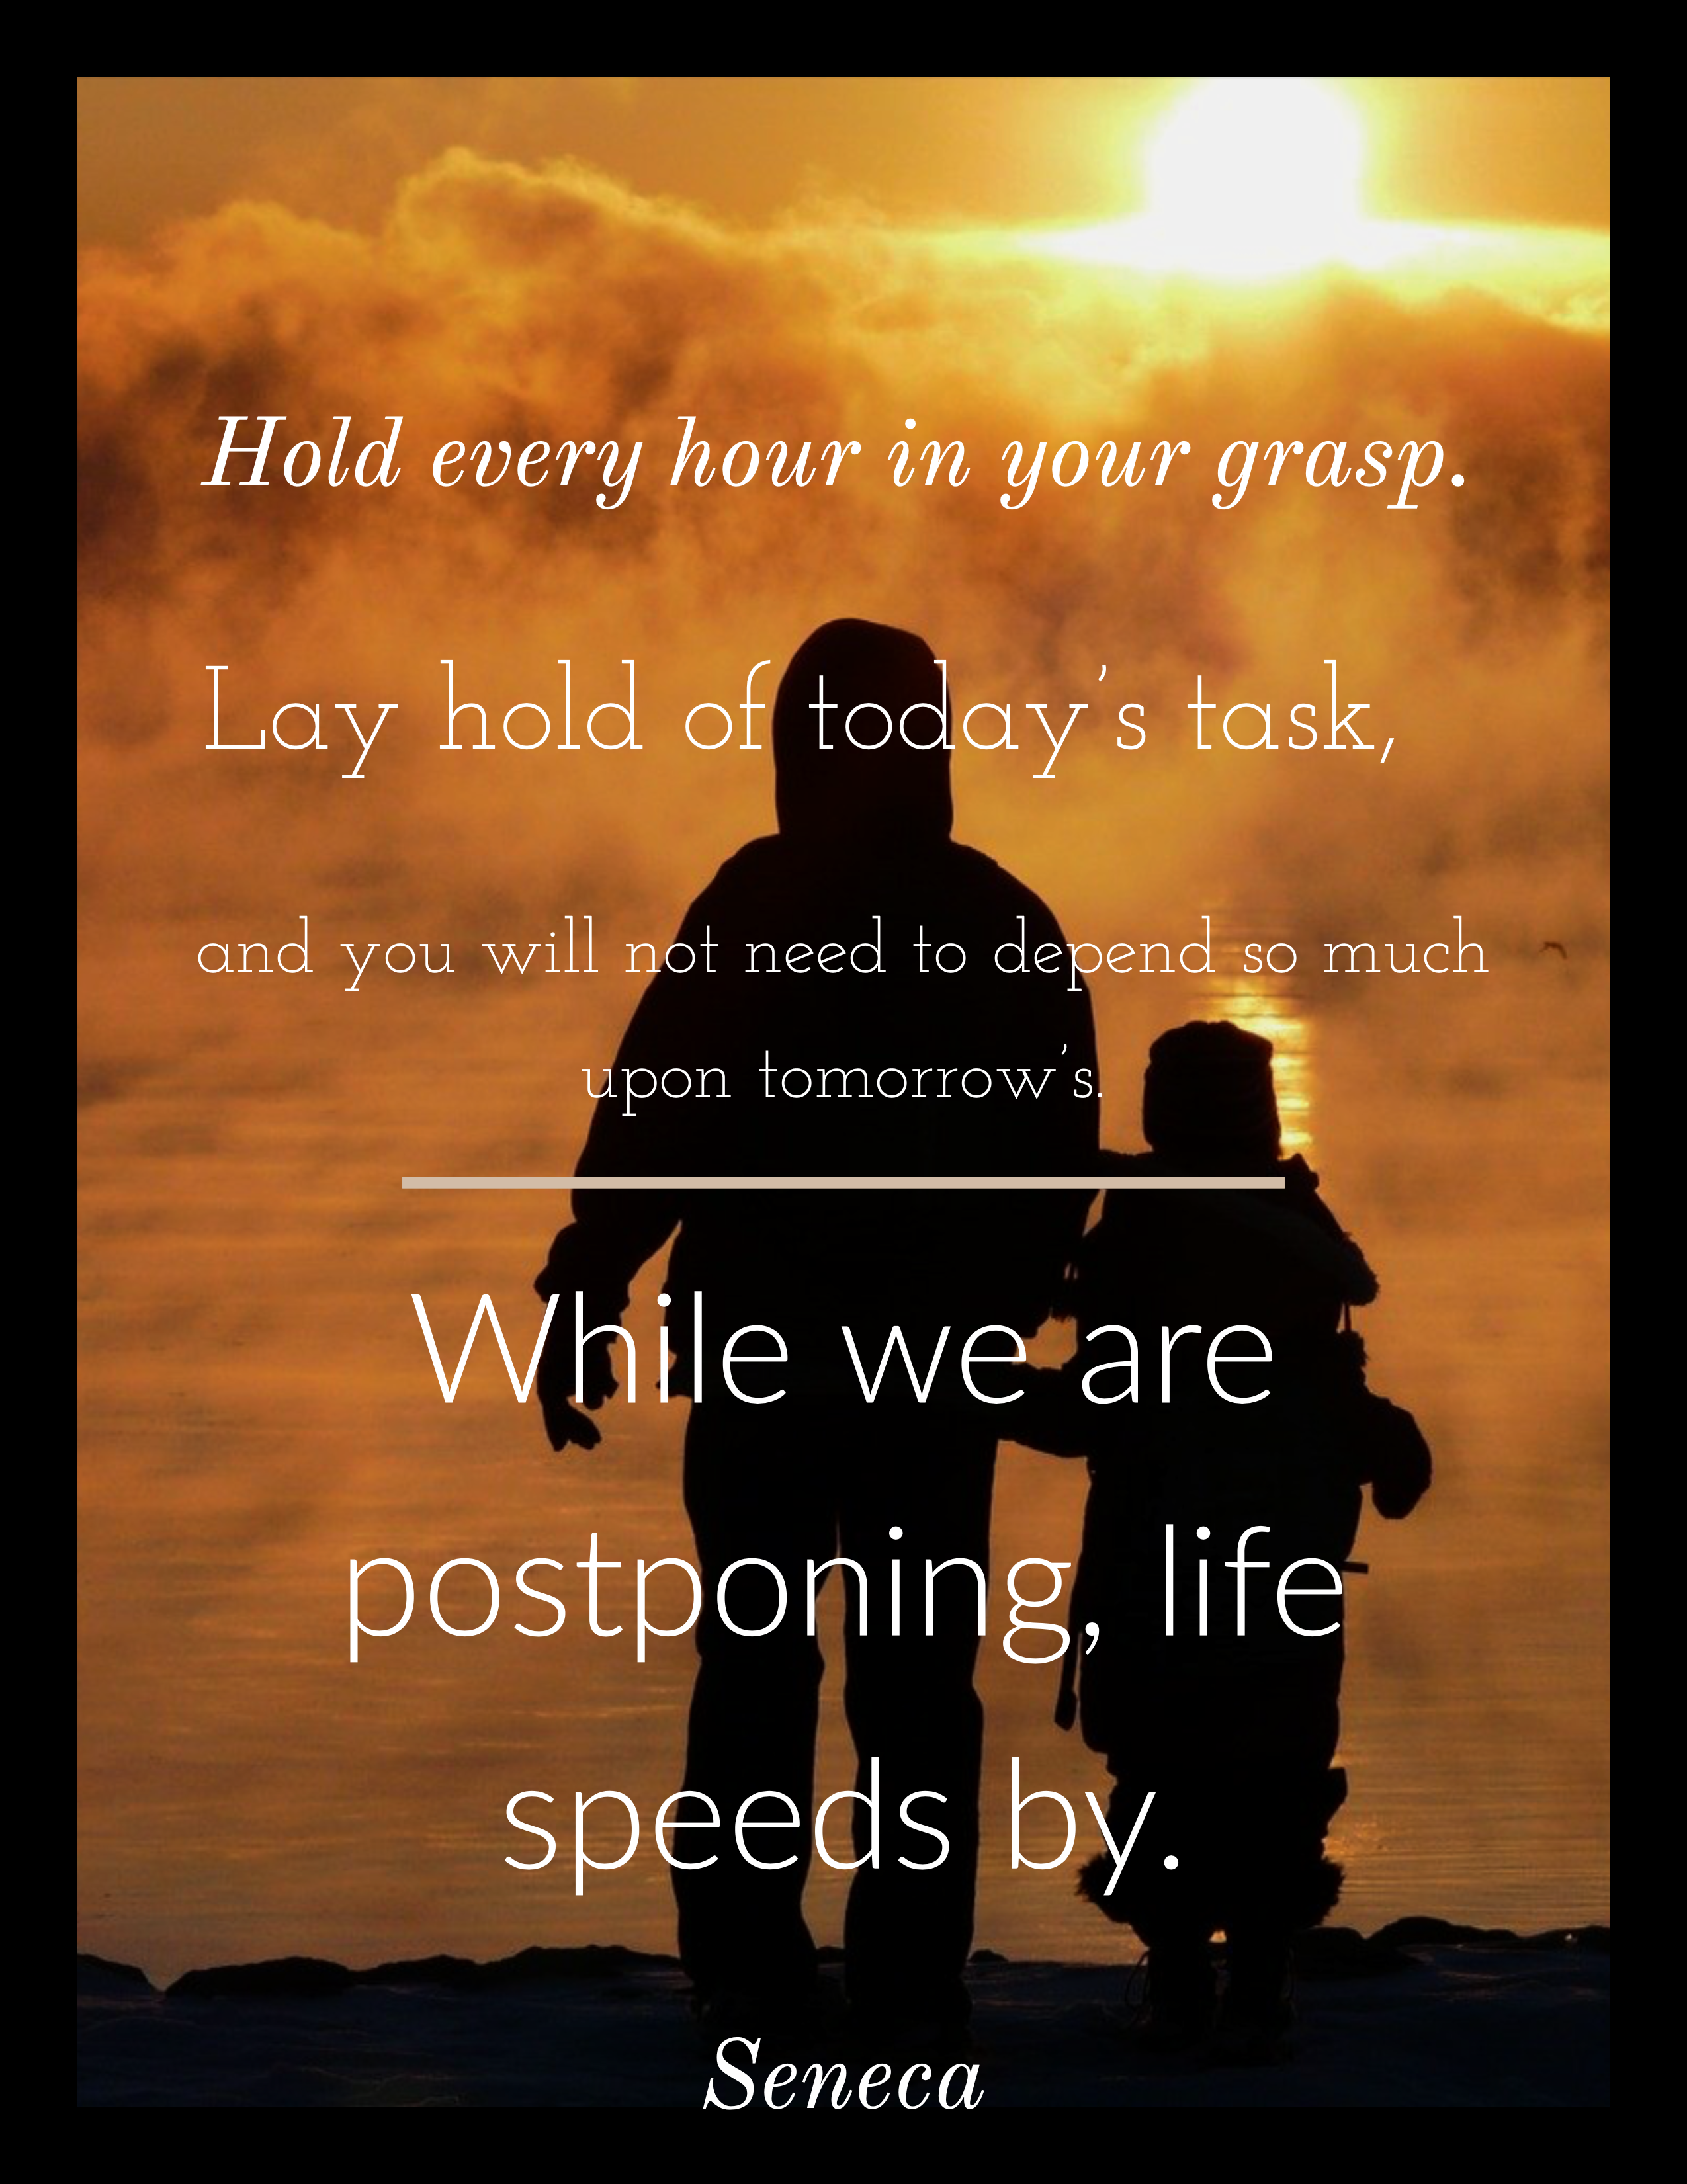 Hold every hour in your grasp…Seneca